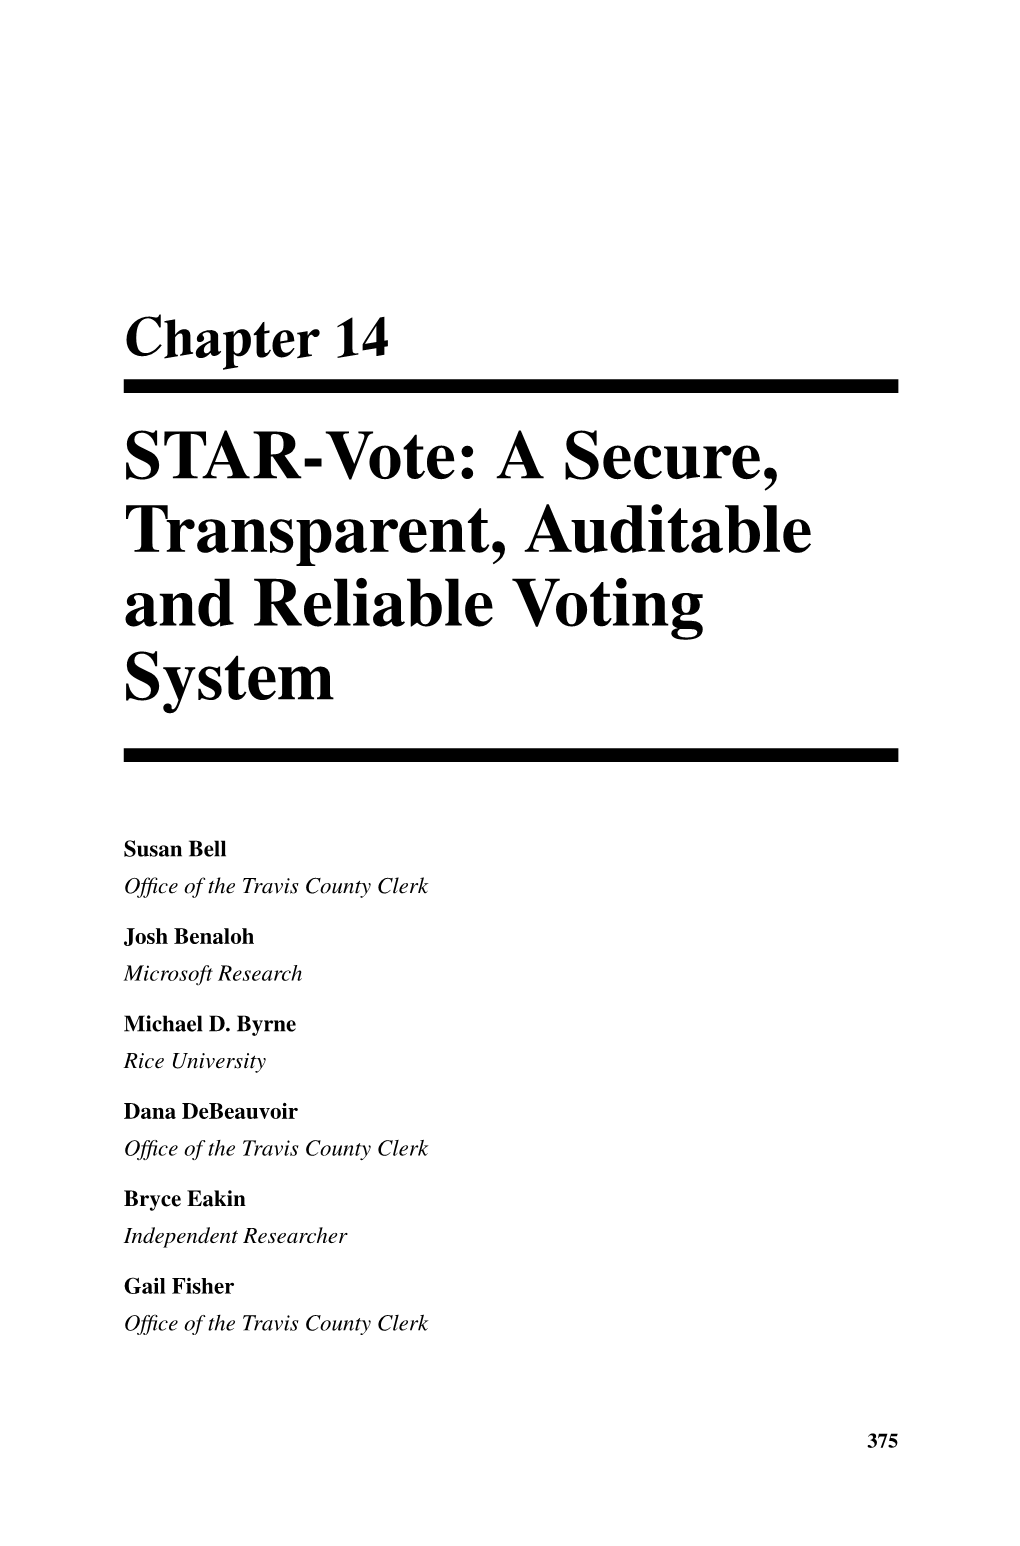 STAR-Vote: a Secure, Transparent, Auditable and Reliable Voting System